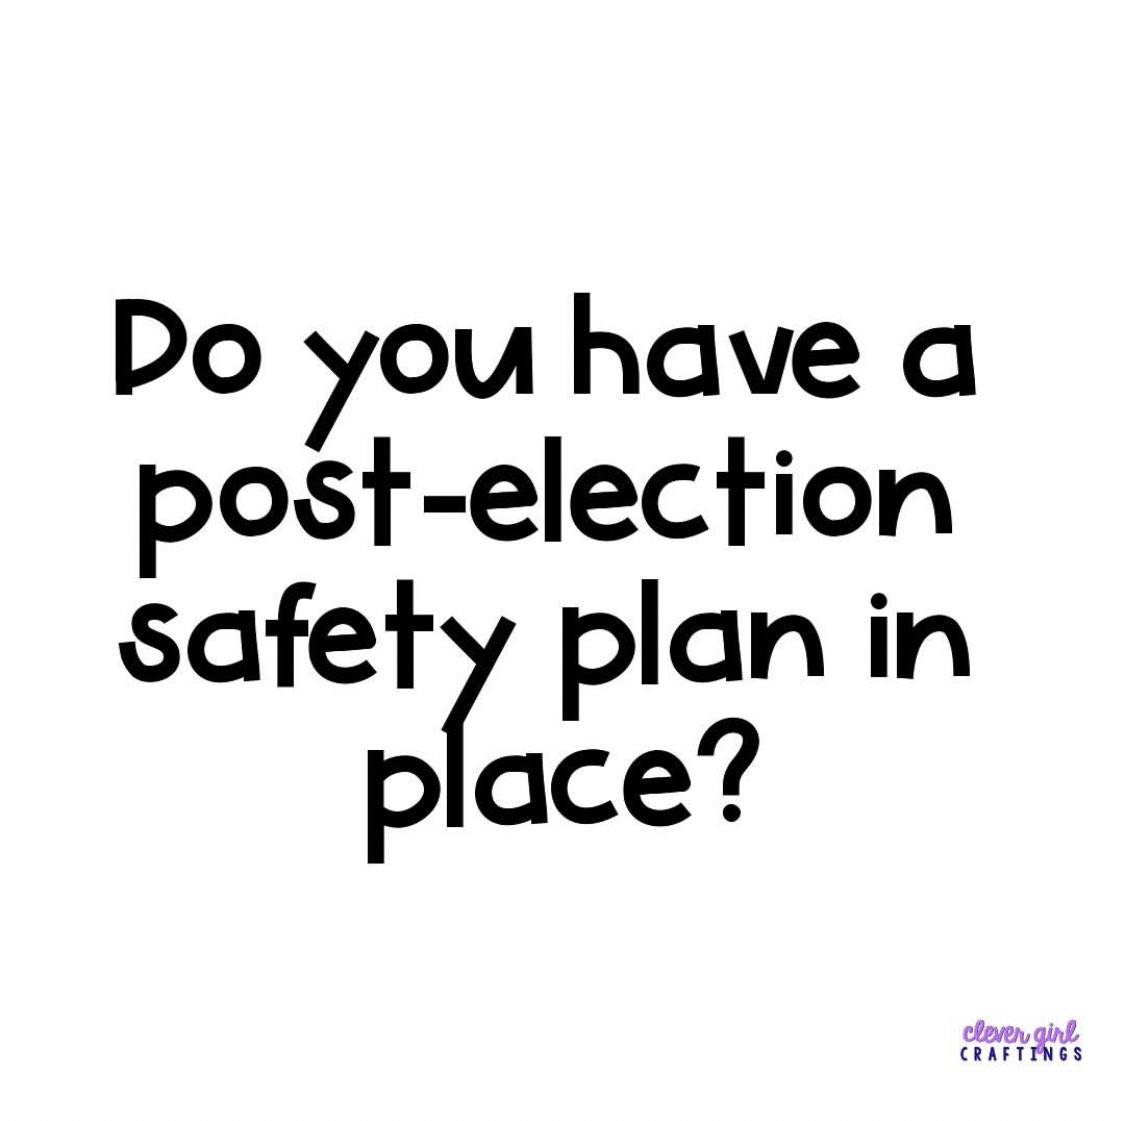 POST ELECTION SAFETY FOR THOSE WHO NEED IT